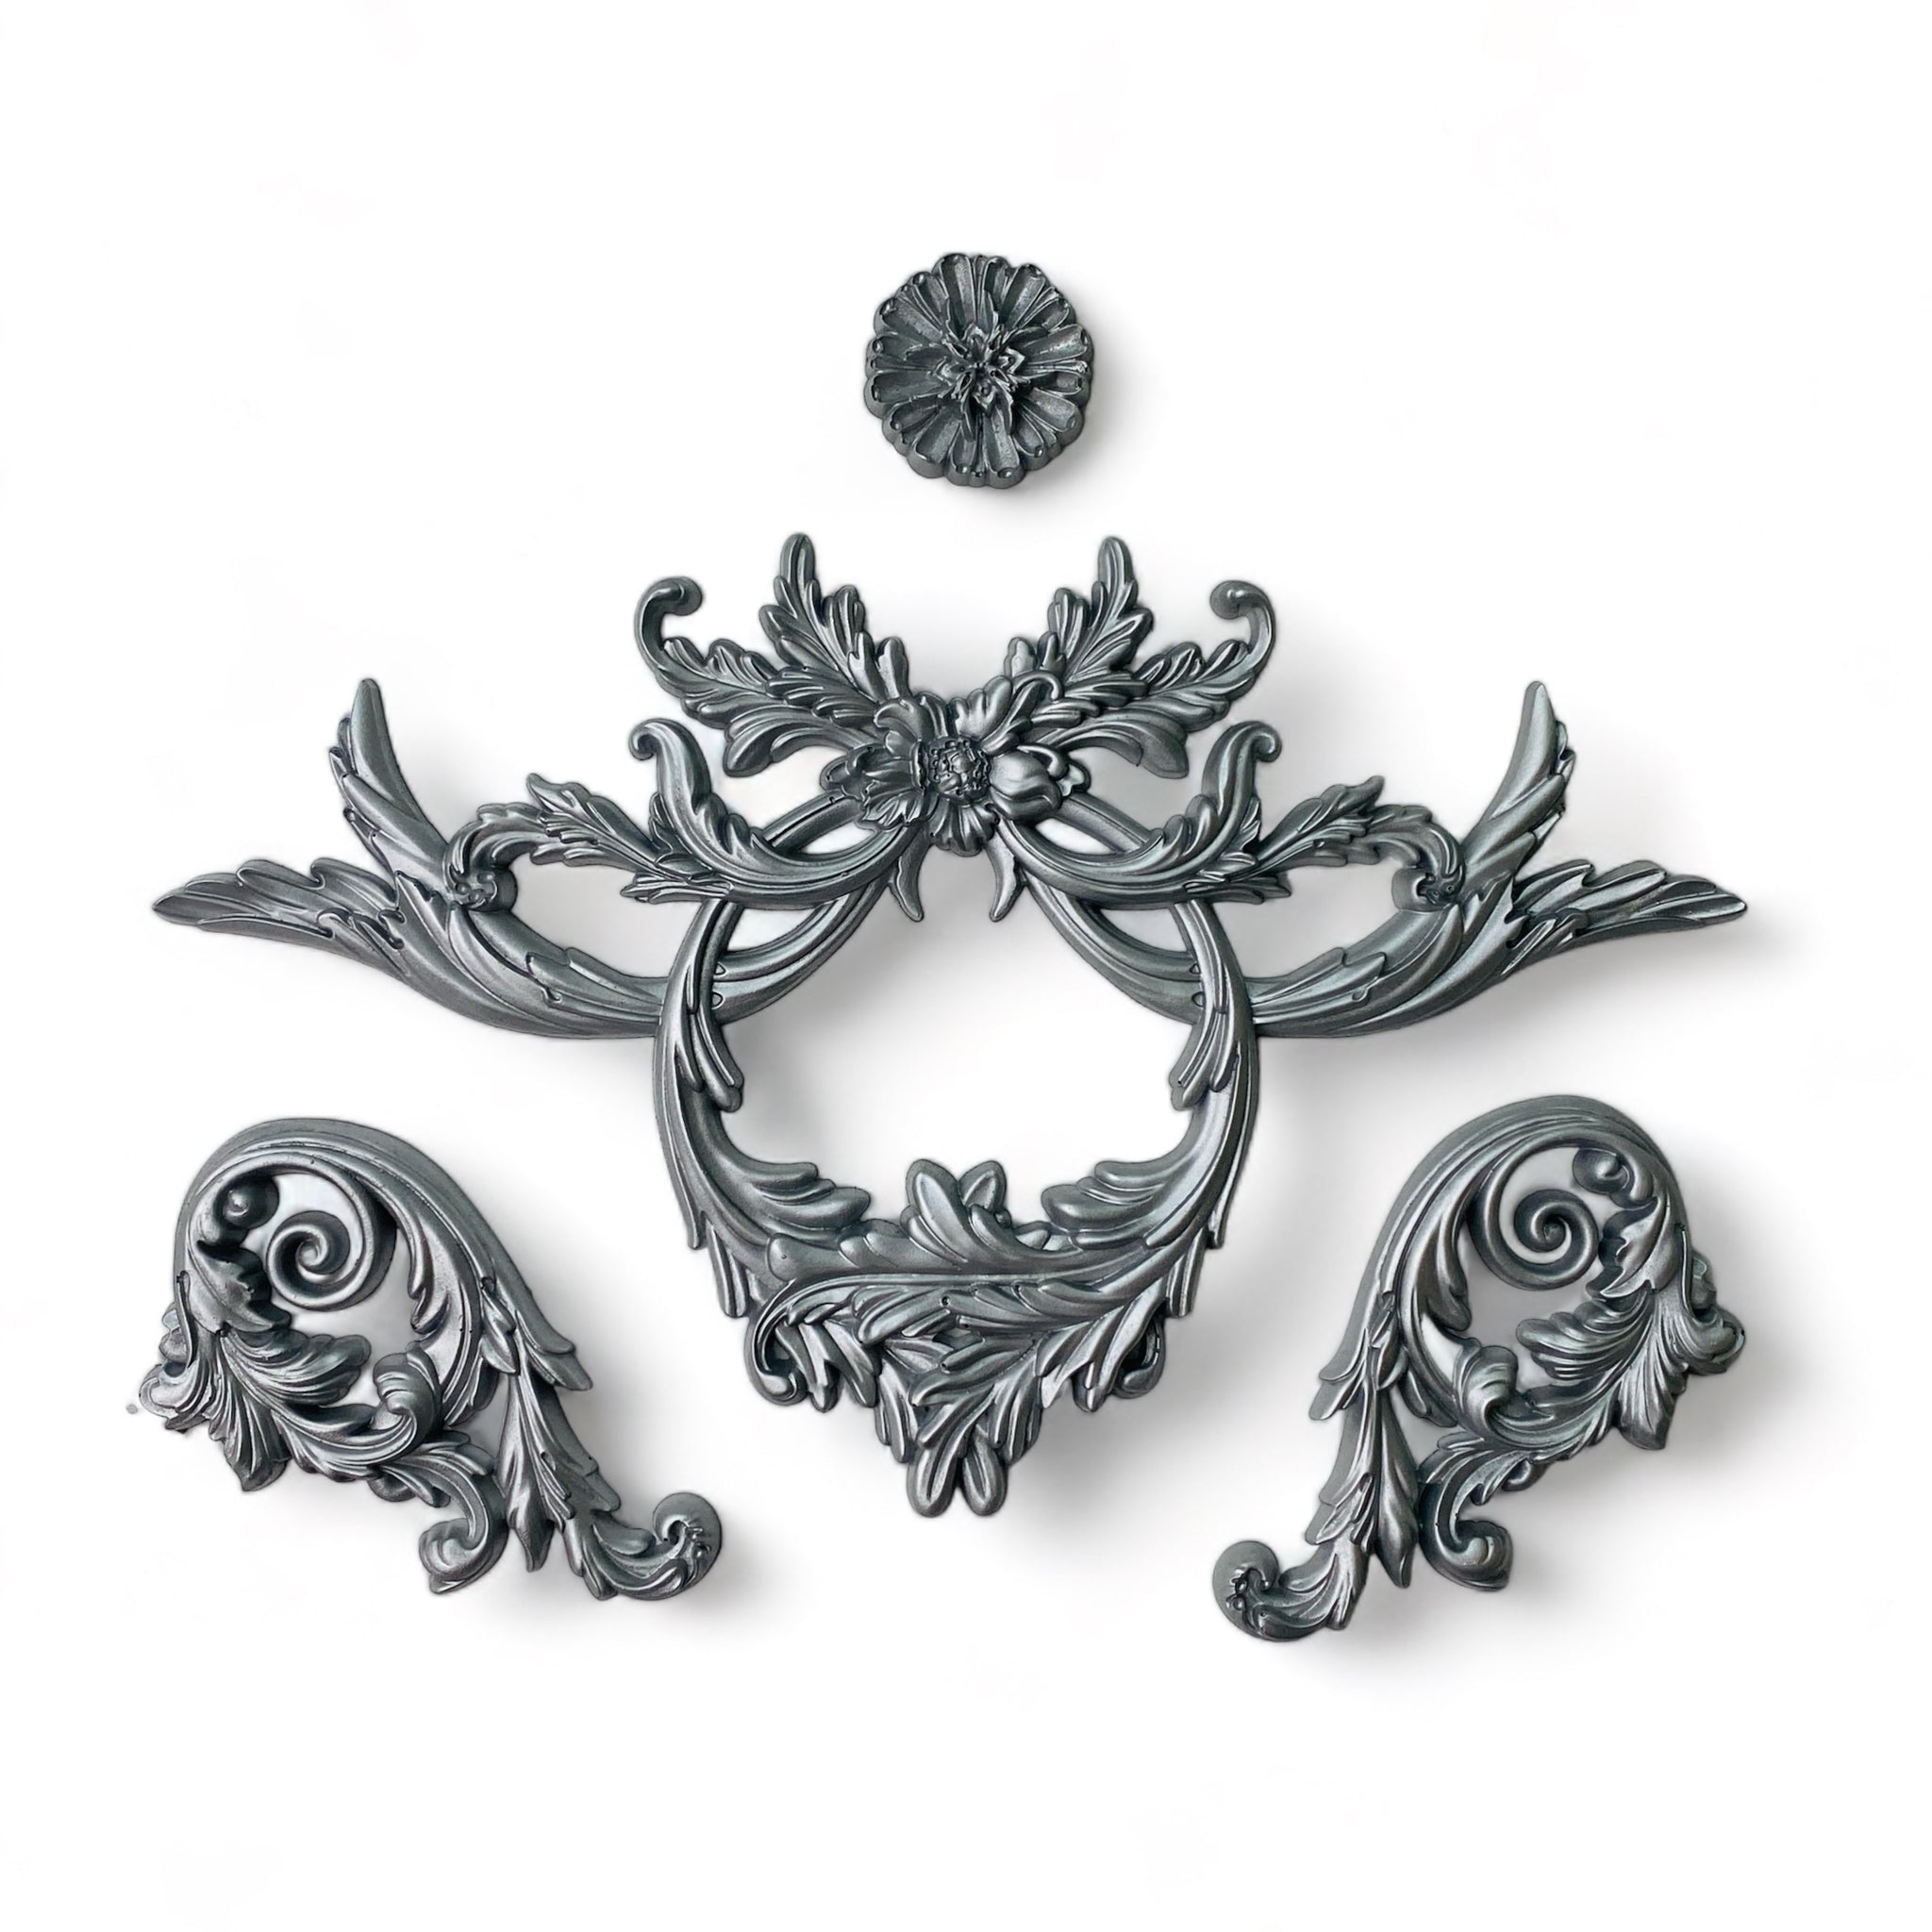 Silver colored castings of ornate scrolling accent pieces and a medallion are against a white background.